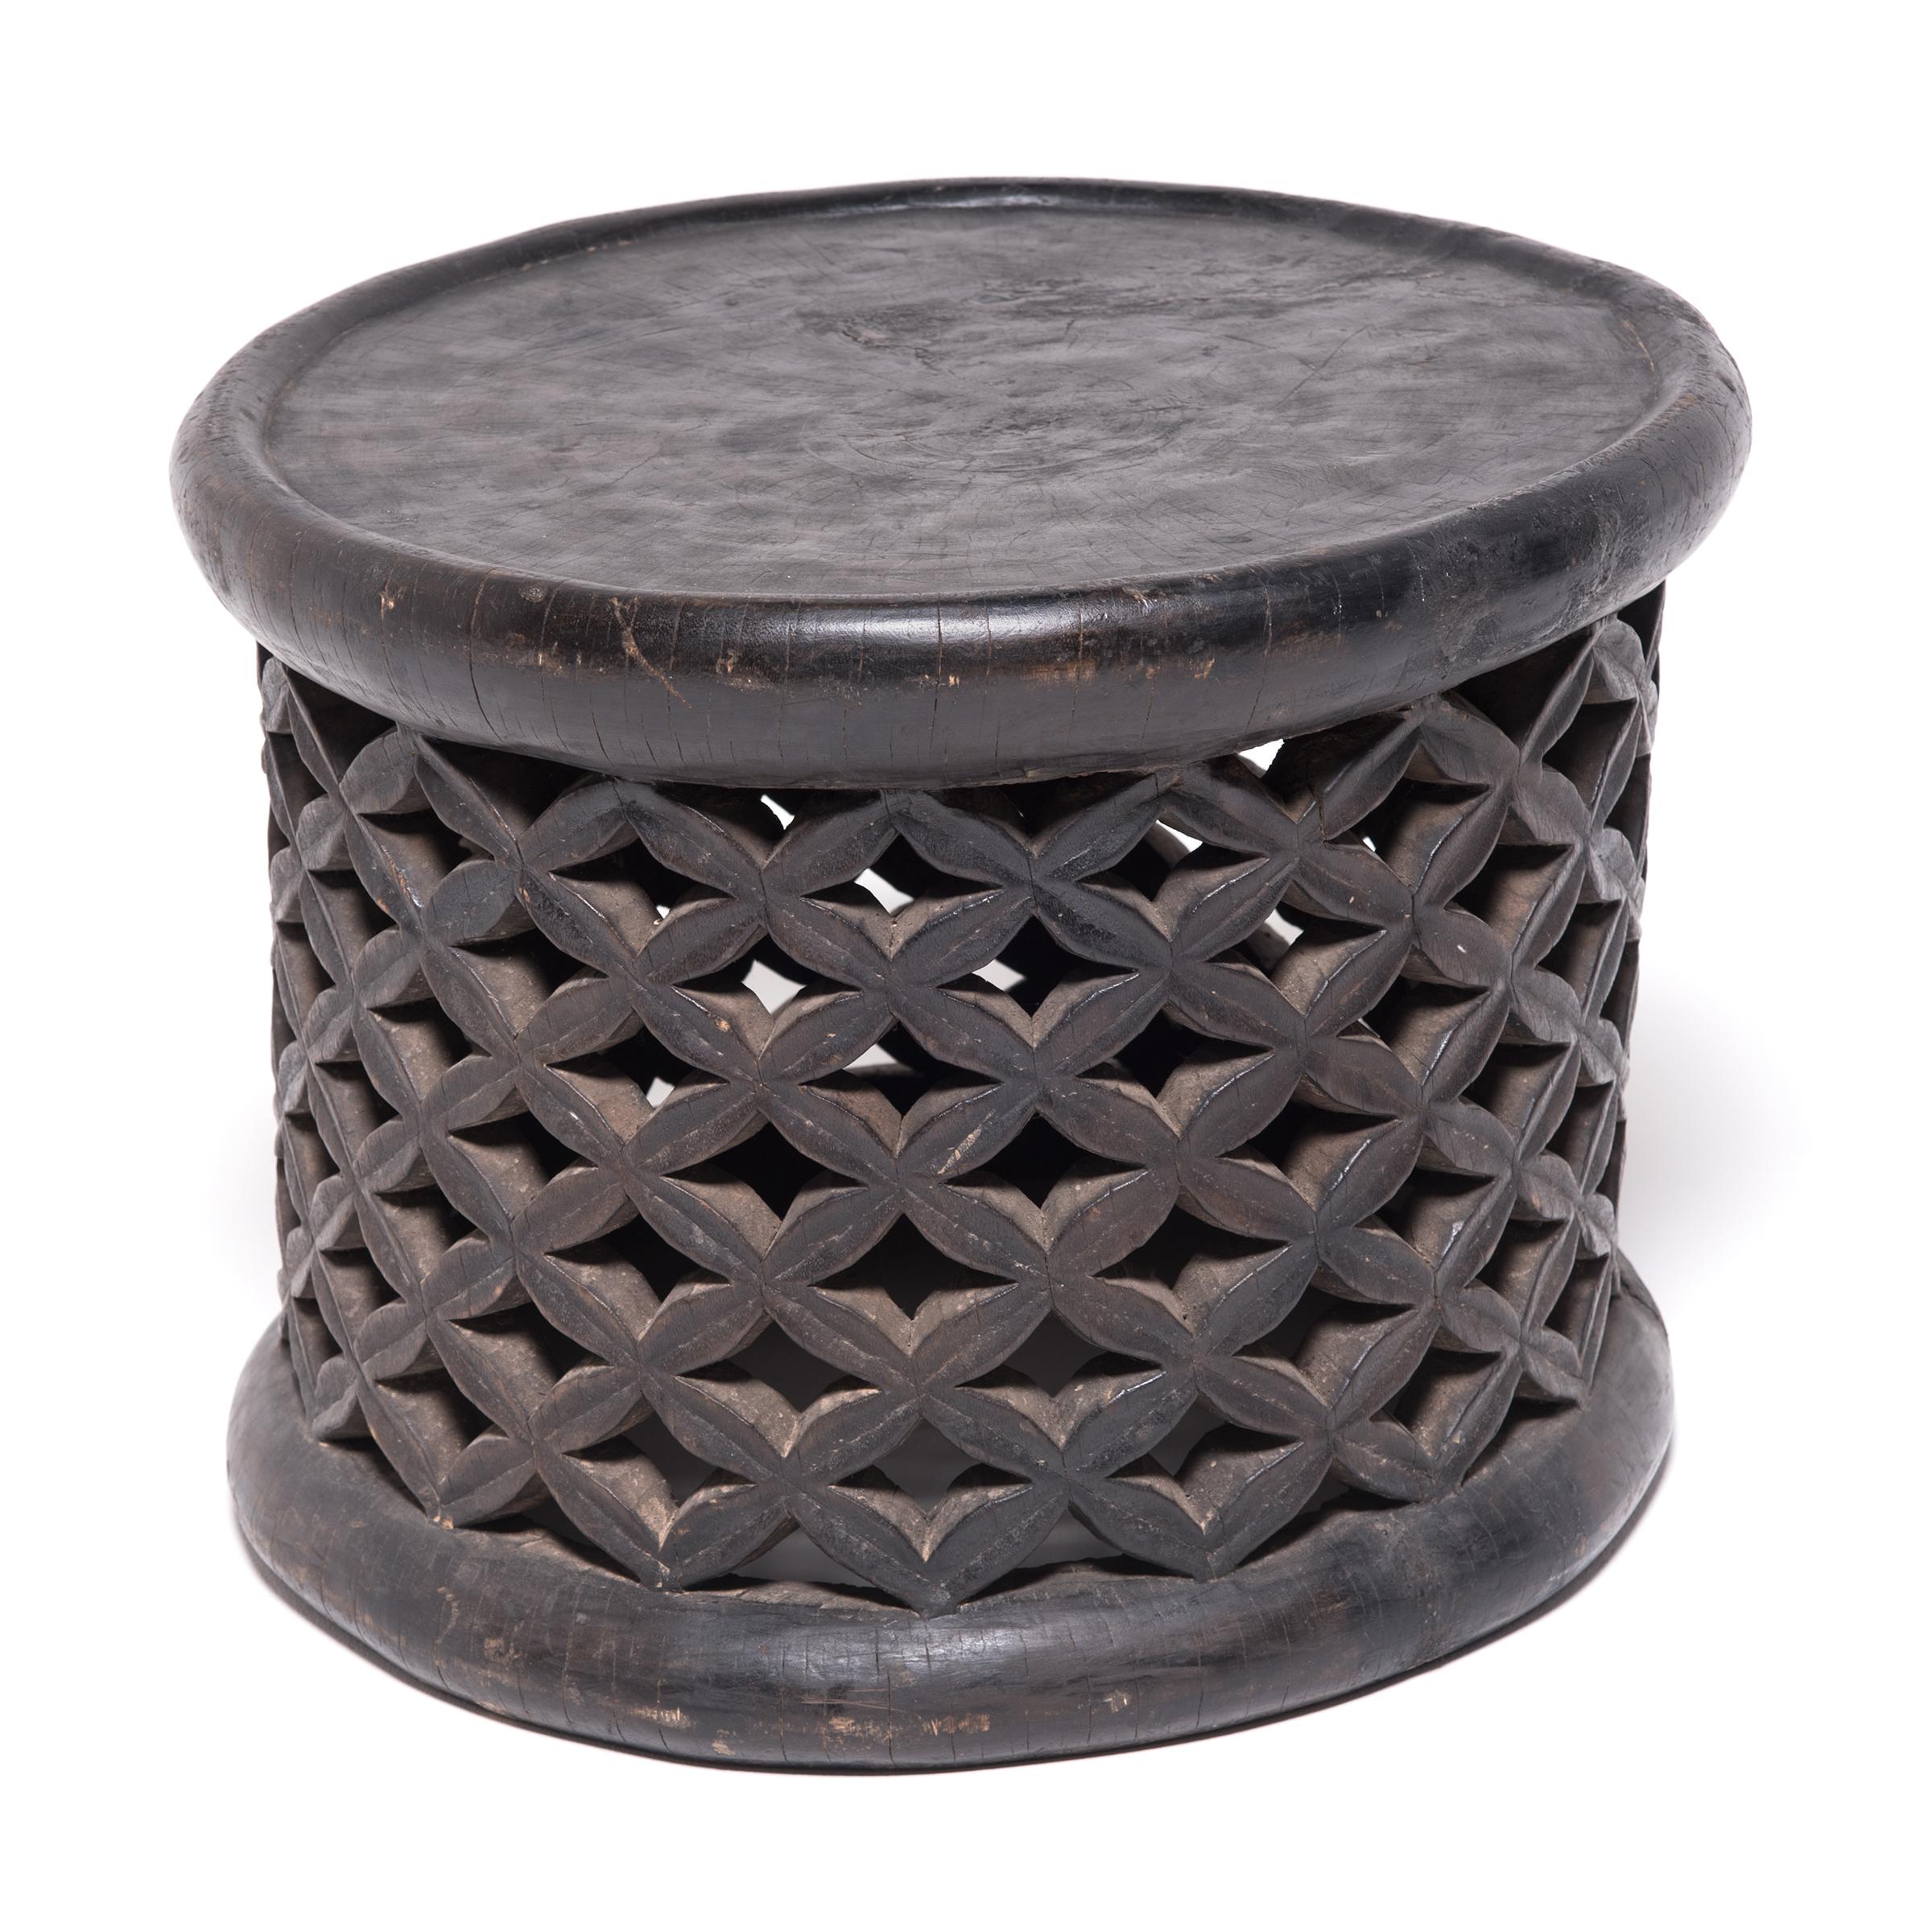 Carved from a single tree trunk, Bamileke lattice stools were used as symbolic seats in public ceremonies. The lattice webbing represents both the life cycle and the divine wisdom of the earth spider. A stool with broken lattice was immediately